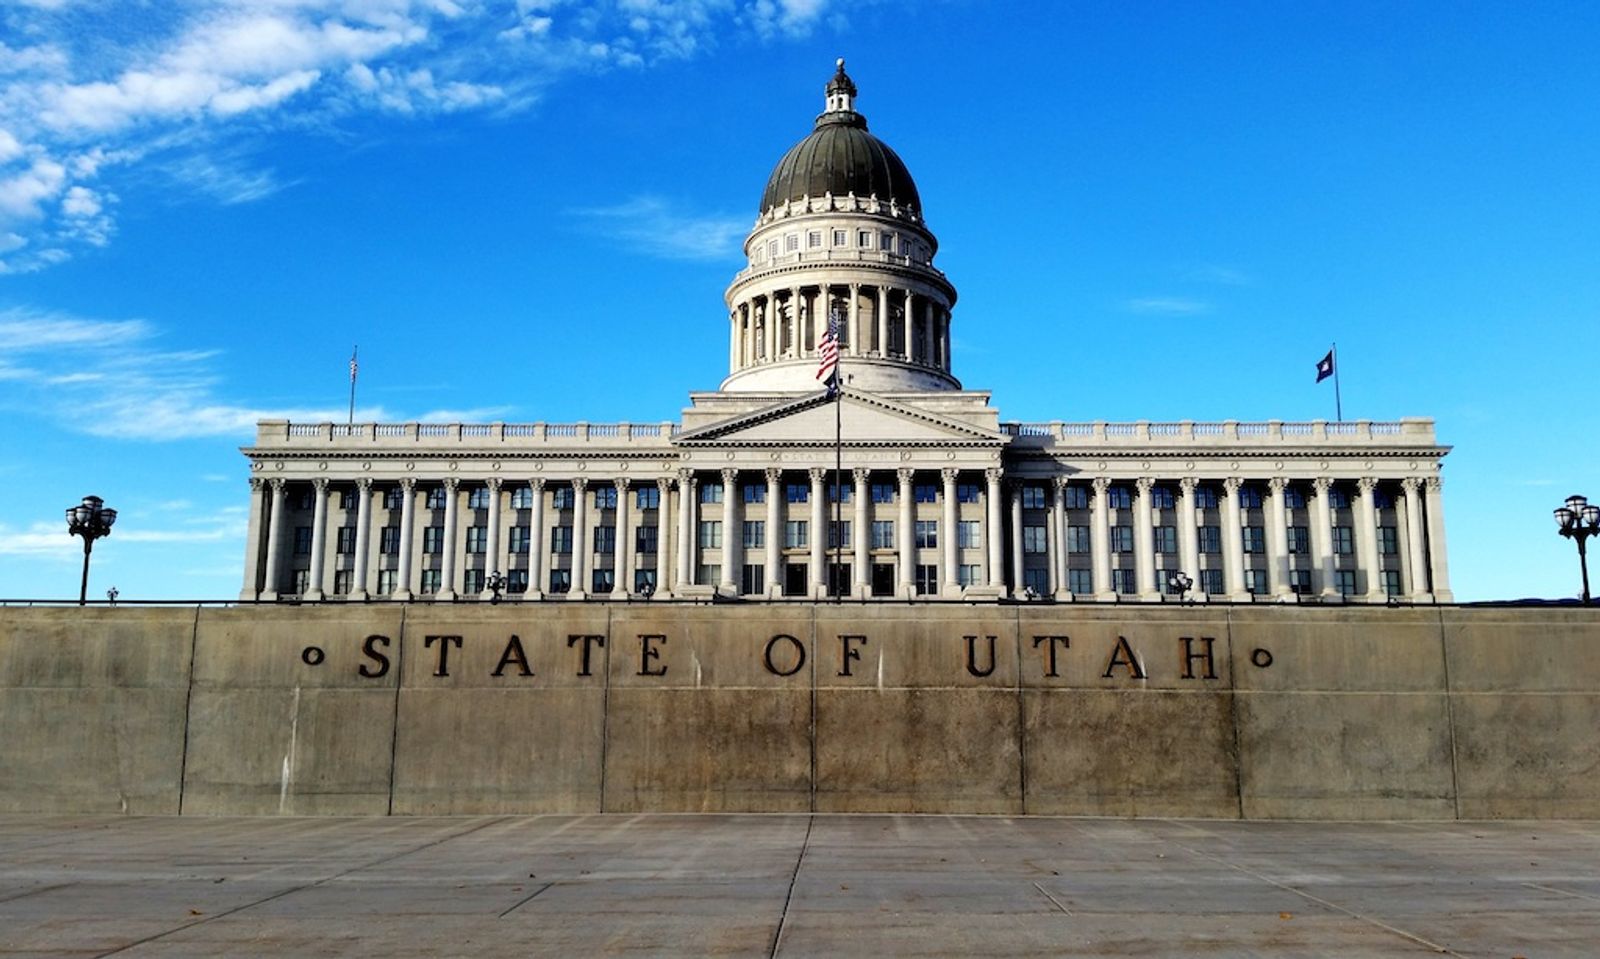 Adult Sites Now Complying With Utah’s New ‘Warning Label’ Law